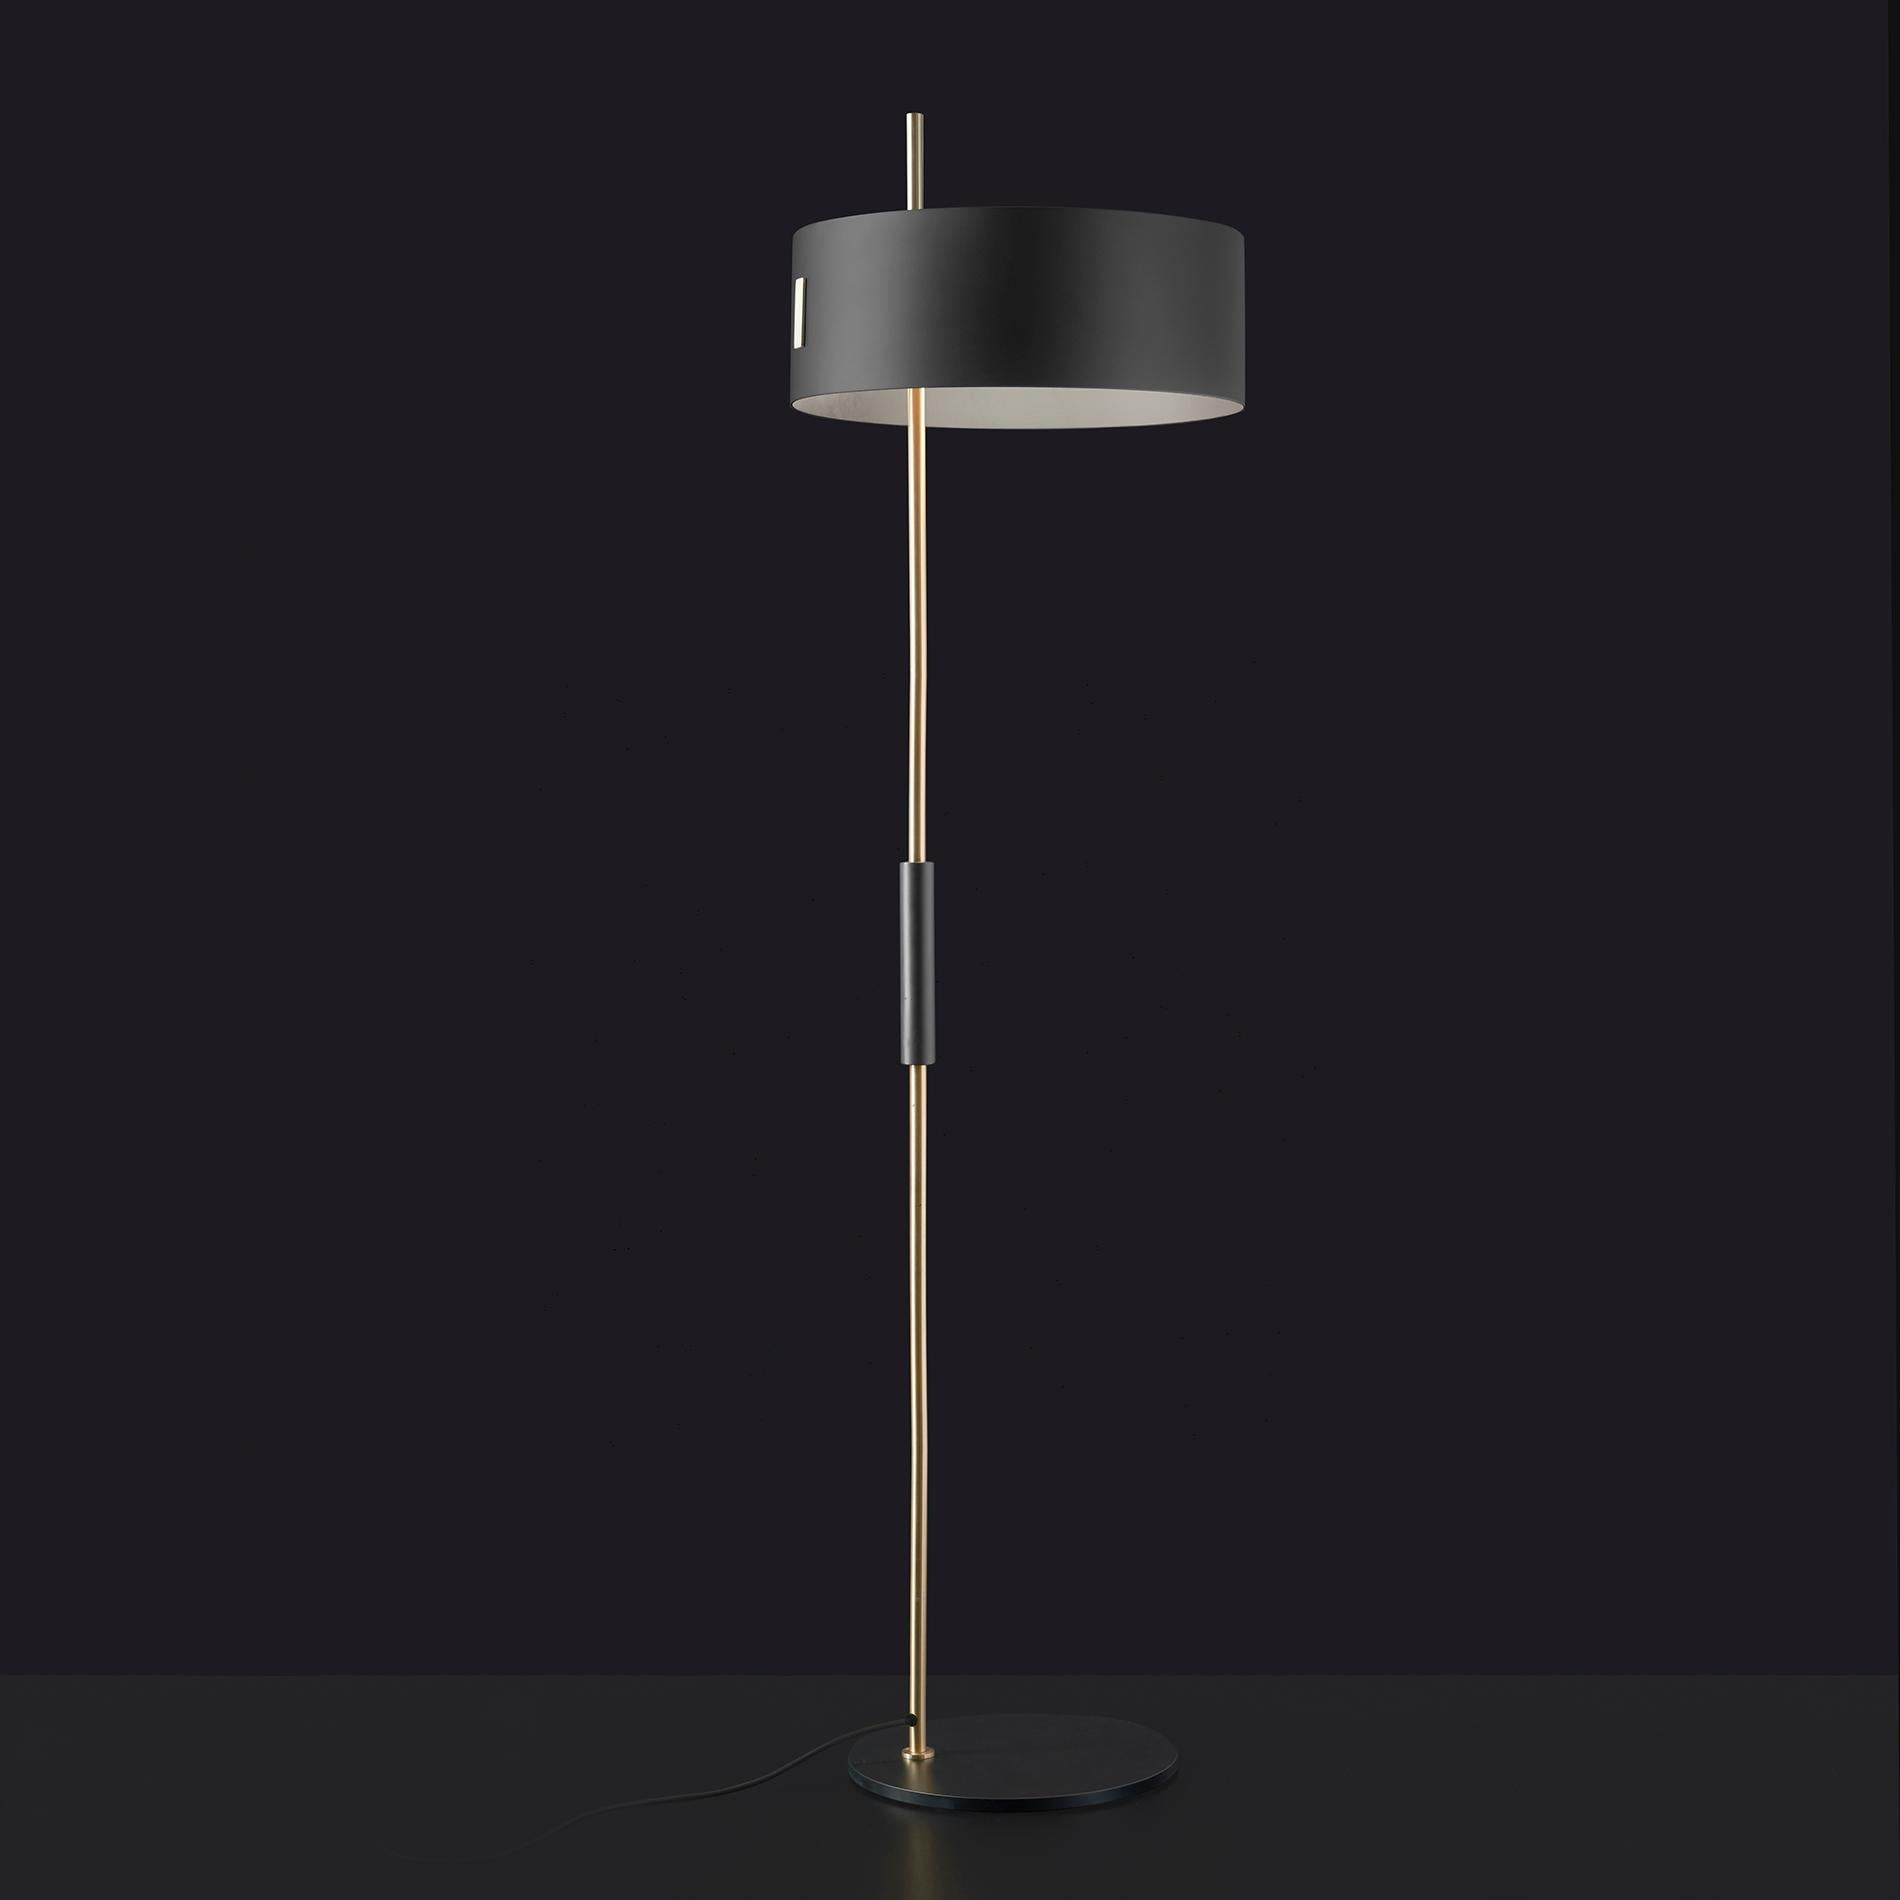 The lamp 1953 designed, by Ostuni e Forti, has two models, floor and table, varying in proportion and size but identical in their design which shifts the whole lampshade section from the centre to the side. A range that elegantly recalls the style